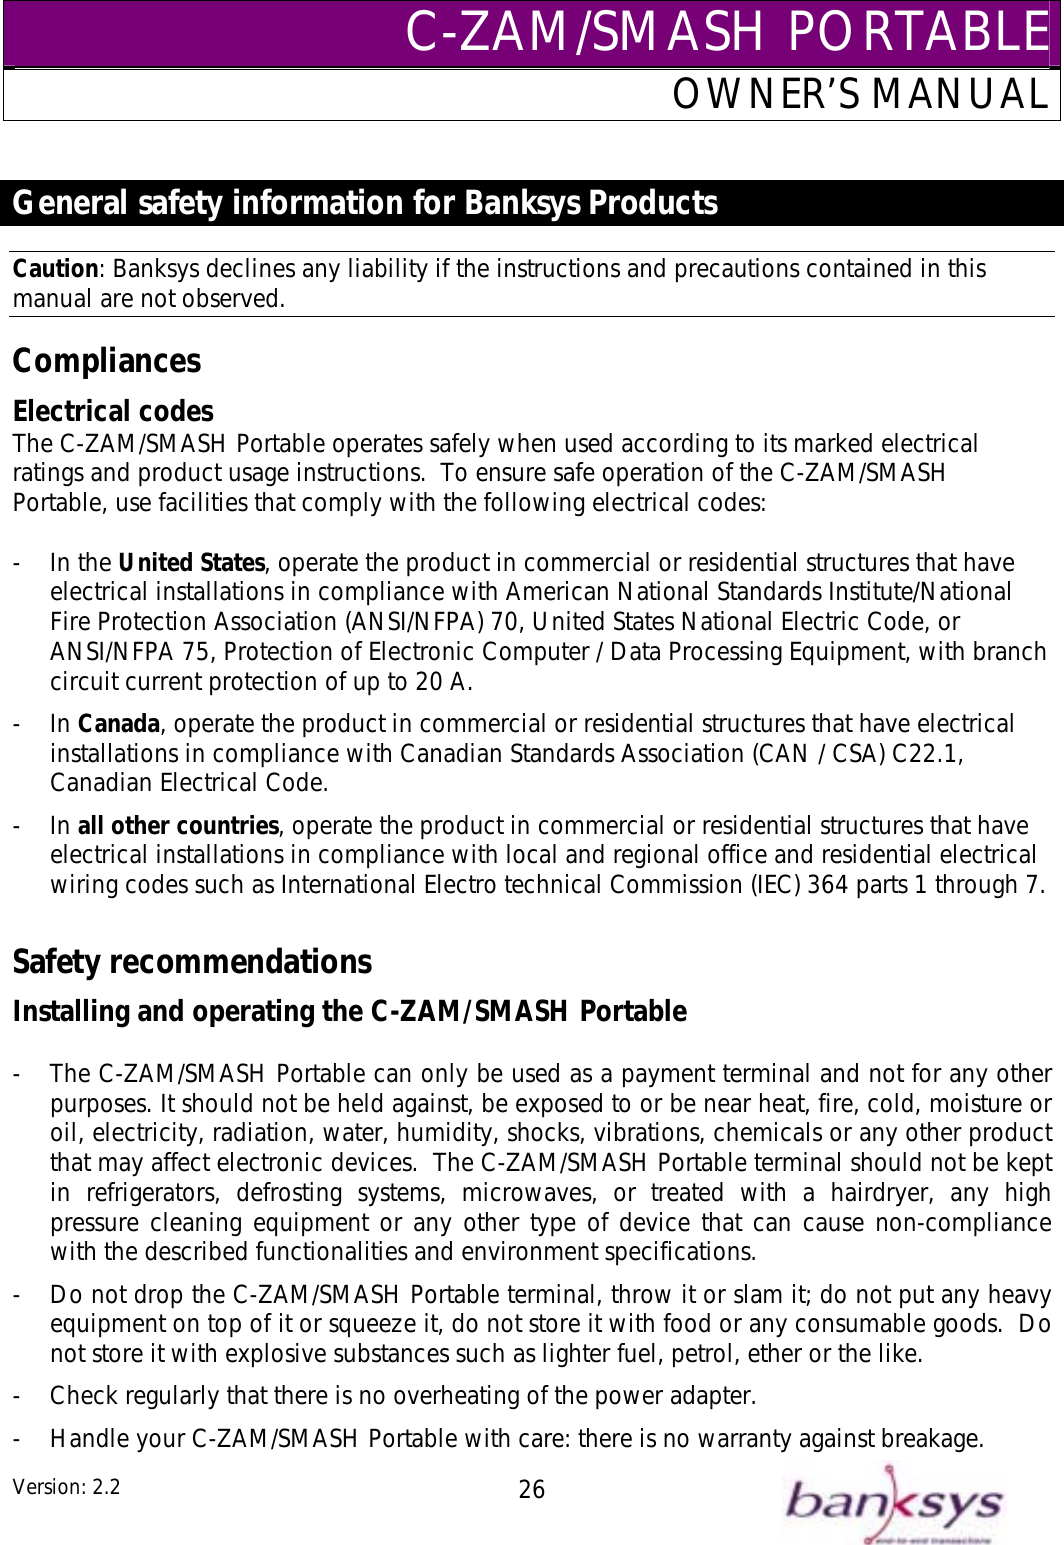 C-ZAM/SMASH PORTABLEOWNER’S MANUAL  General safety information for Banksys Products Caution: Banksys declines any liability if the instructions and precautions contained in this s safely when used according to its marked electrical s.  To ensure safe operation of the C-ZAM/SMASH ith the following electrical codes: manual are not observed. Compliances Electrical codes The C-ZAM/SMASH Portable operateratings and product usage instructionPortable, use facilities that comply w - In the United States, operate t  p  that have electrical installations in compliance with American National Standards Institute/National Fire Protection Association (ANSI/NFPA) 70, United States National Electric Code, or ANSI/NFPA 75, Protection of Electronic Computer / Data Processing Equipment, with branch circuit current protection of up to 20 A. - In Canada, operate the product in commercial or residential structures that have electrical installations in compliance with Canadian Standards Association (CAN / CSA) C22.1, Canadian Electrical Code. - In all other countries, operate the product in commercial or residential structures that have electrical installations in compliance with local and regional office and residential electrical wiring codes such as International Electro technical Commission (IEC) 364 parts 1 through 7.  Safety recommendations Installing and operating the C-ZAM/SMASH Portable  -  The C-ZAM/SMASH Portable can only be used as a payment terminal and not for any other purposes. It should not be held against, be exposed to or be near heat, fire, cold, moisture or oil, electricity, radiation, water, humidity, shocks, vibrations, chemicals or any other product that may affect electronic devices.  The C-ZAM/SMASH Portable terminal should not be kept in refrigerators, defrosting systems, microwaves, or treated with a hairdryer, any high pressure cleaning equipment or any other type of device that can cause non-compliance with the described functionalities and environment specifications. -  Do not drop the C-ZAM/SMASH Portable terminal, throw it or slam it; do not put any heavy equipment on top of it or squeeze it, do not store it with food or any consumable goods.  Do not store it with explosive substances such as lighter fuel, petrol, ether or the like. -  Check regularly that there is no overheating of the power adapter. -  Handle your C-ZAM/SMASH Portable with care: there is no warranty against breakage. he roduct in commercial or residential structuresVersion: 2.2  26